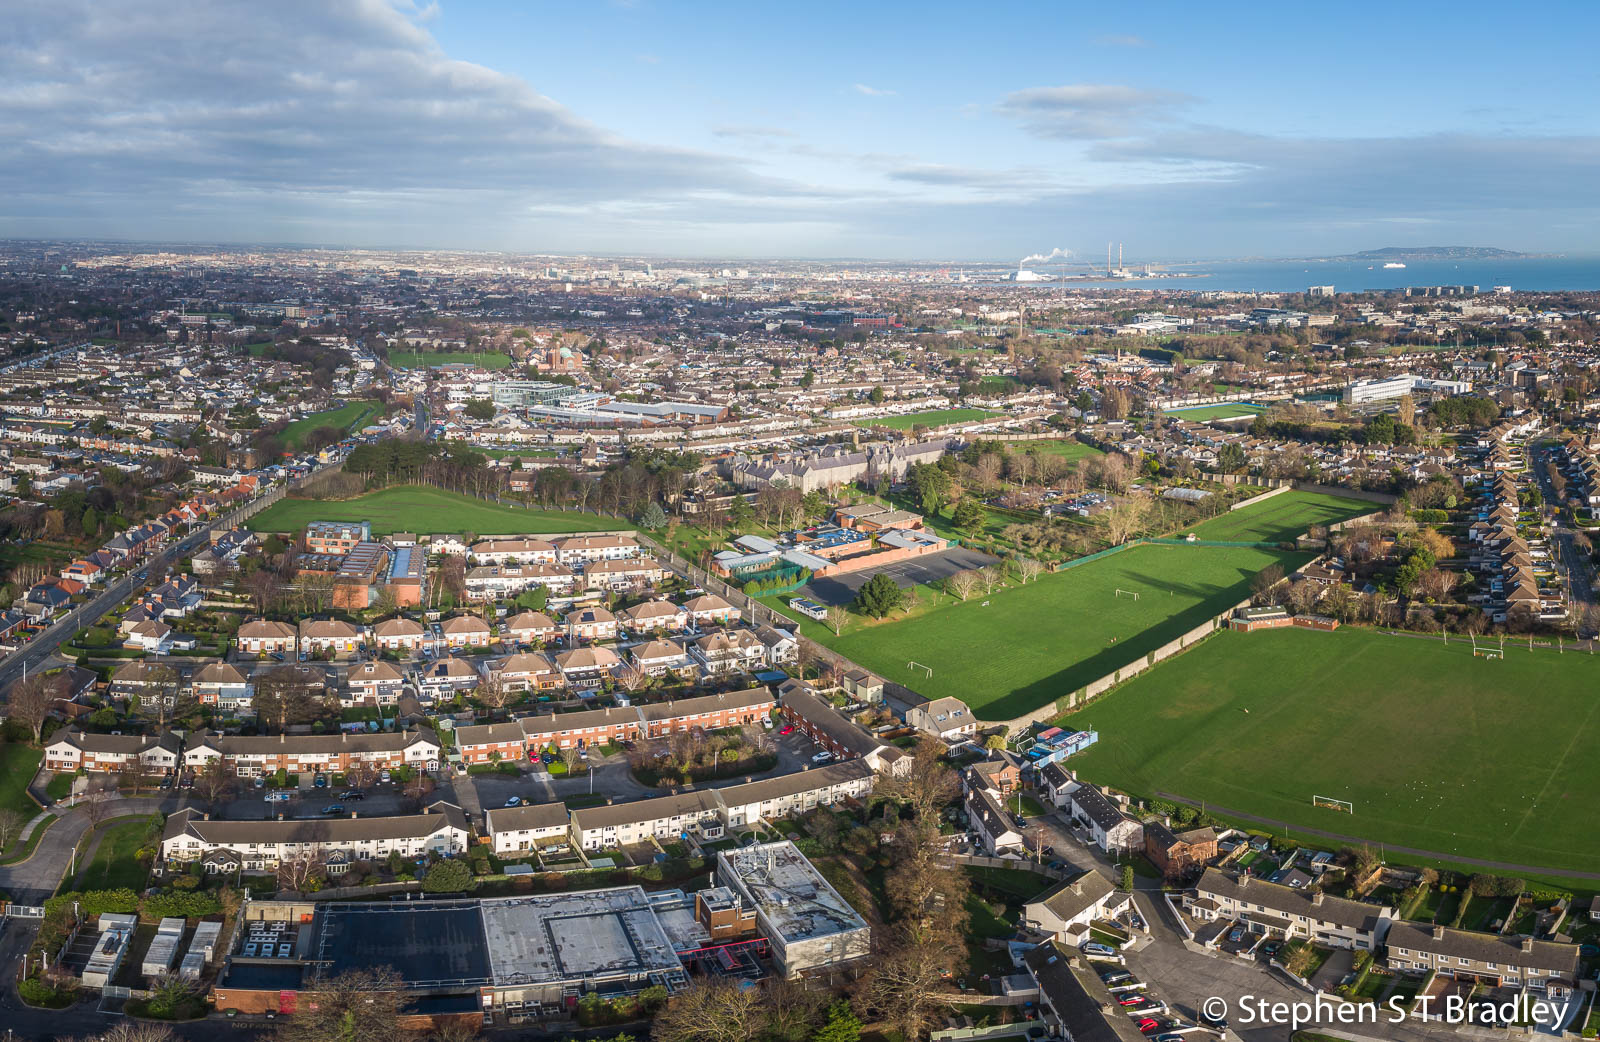 Aerial drone photography and video production services Dublin and Ireland portfolio - commercial aerial photography of the Dundrum suburb of Dublin Ireland. Photo 3